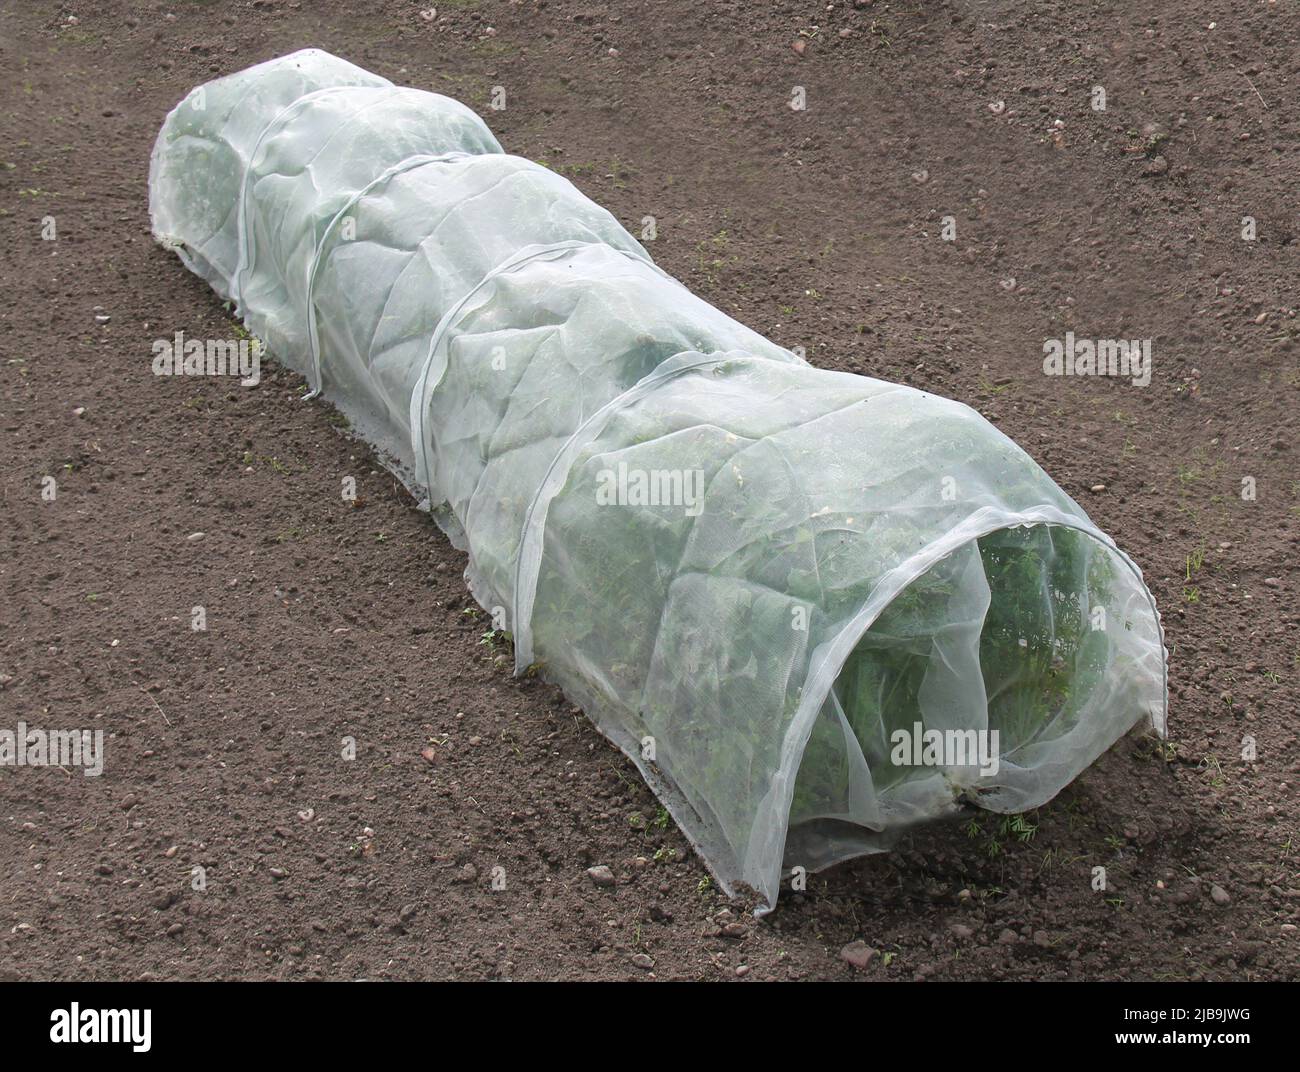 A Crop of Carrot Plants Covered by Horticultural Fleece. Stock Photo